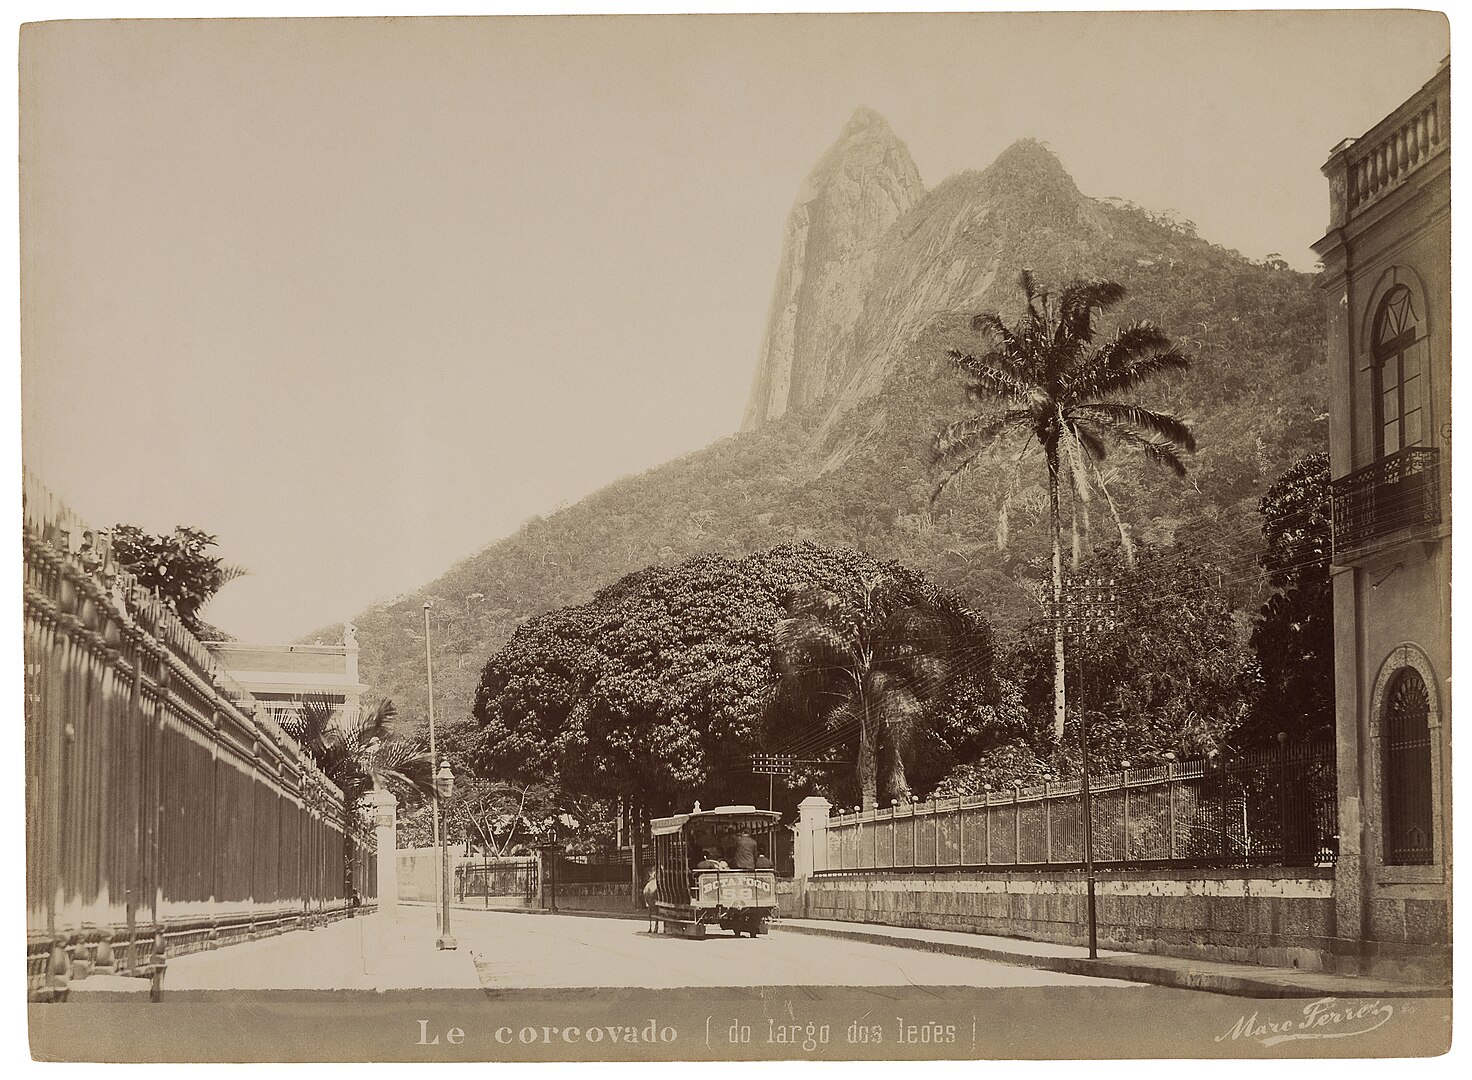 A view of the Corcovado before the construction, 19th century